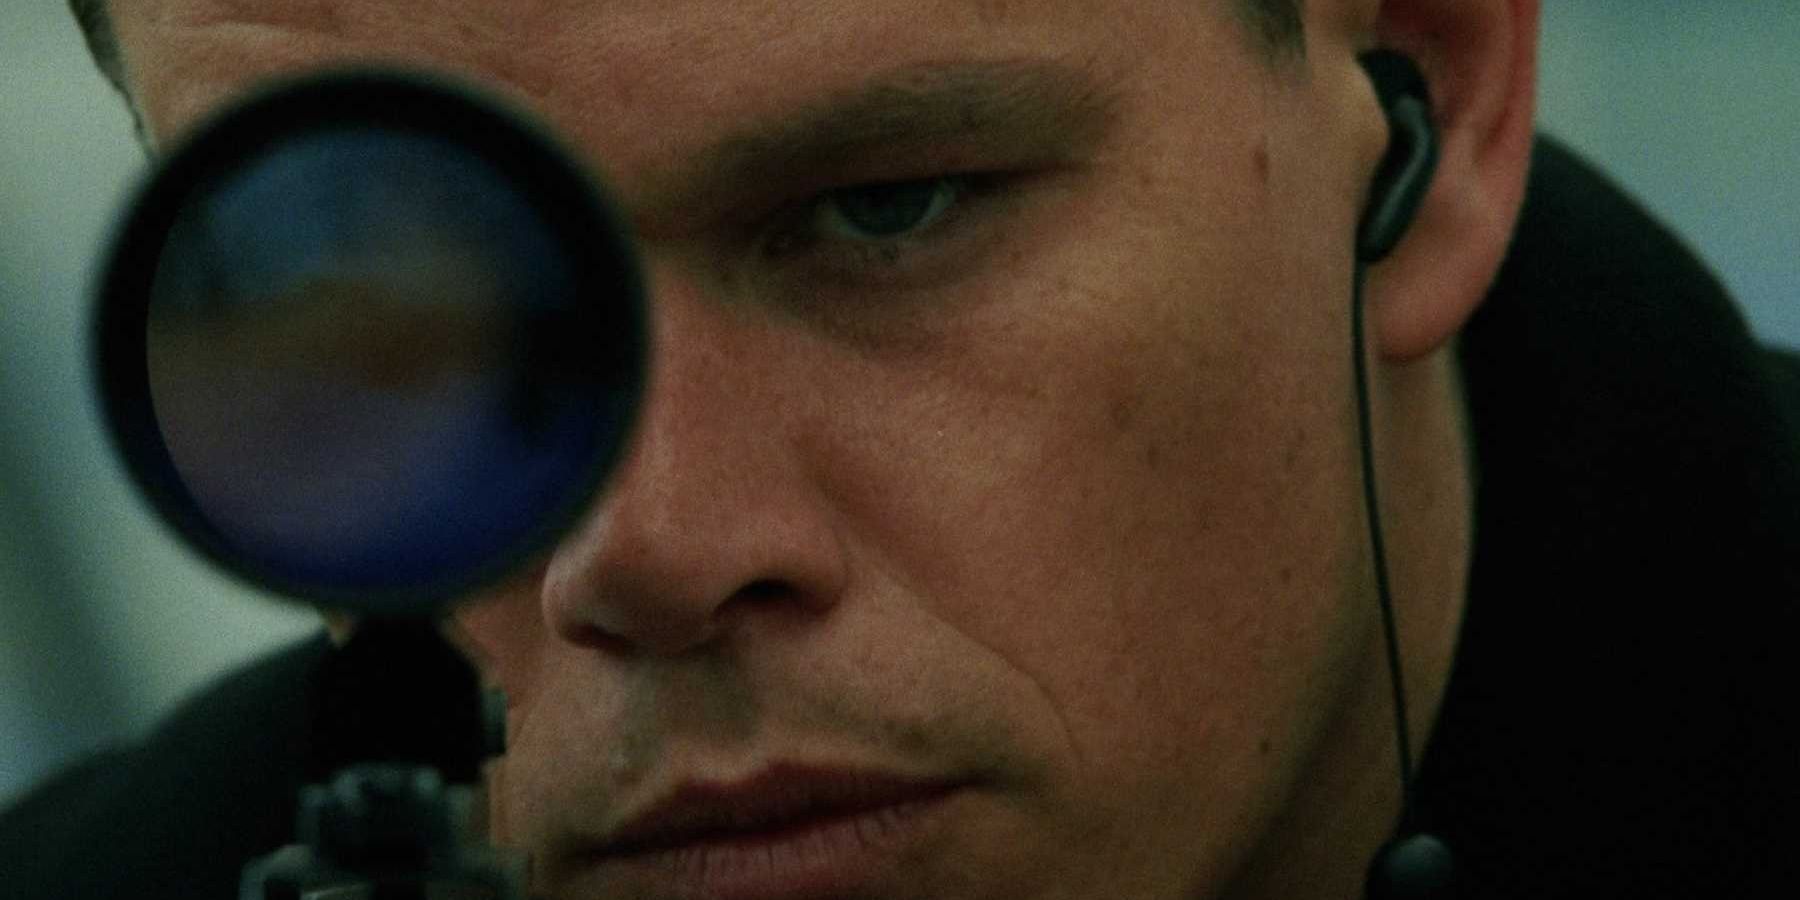 Jason Bourne looking through rifle in The Bourne Supremacy